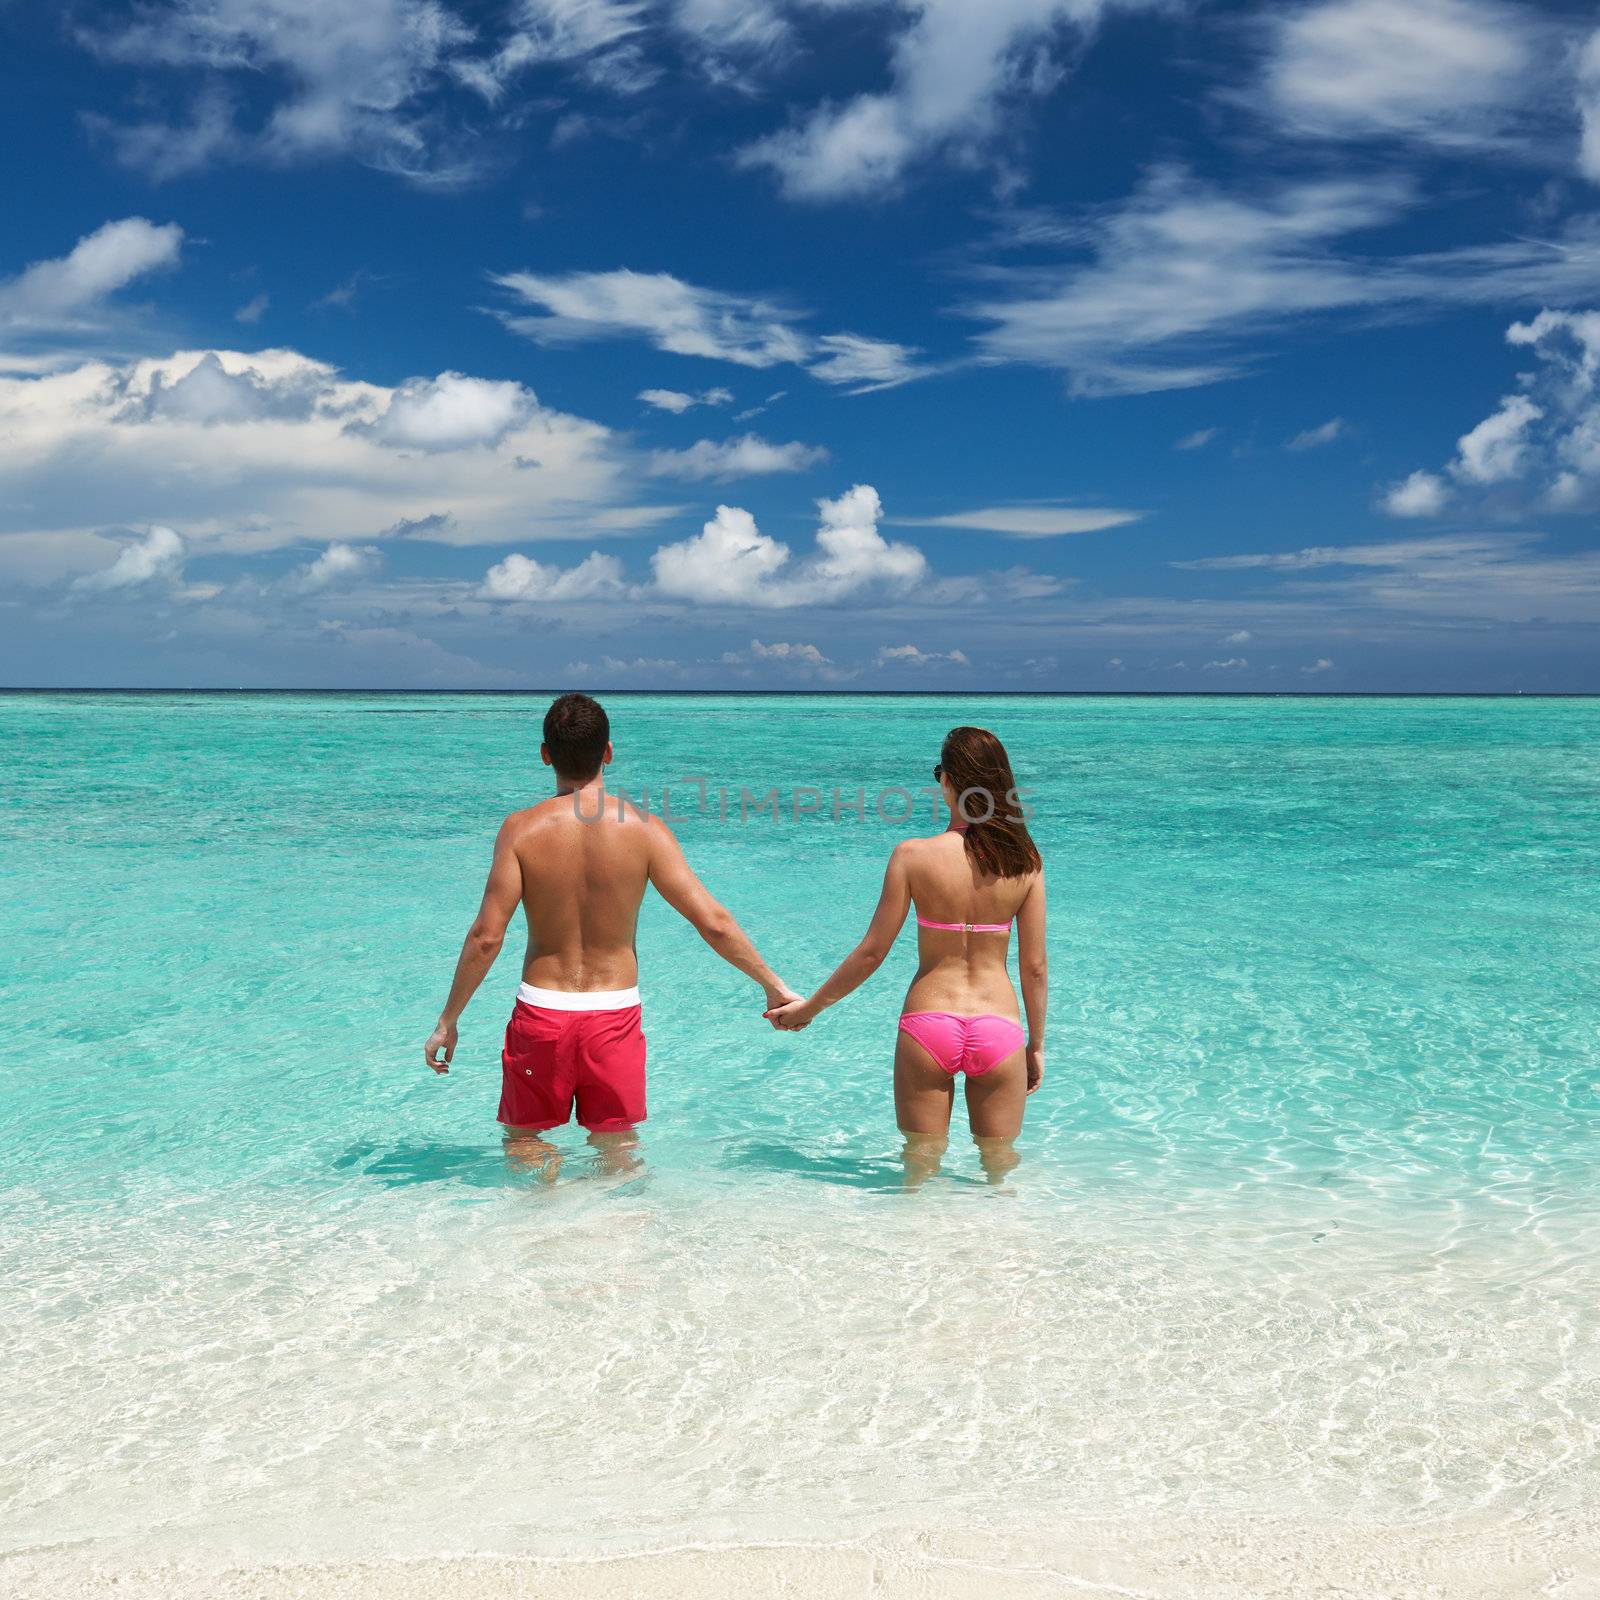 Couple on a beach at Maldives by haveseen